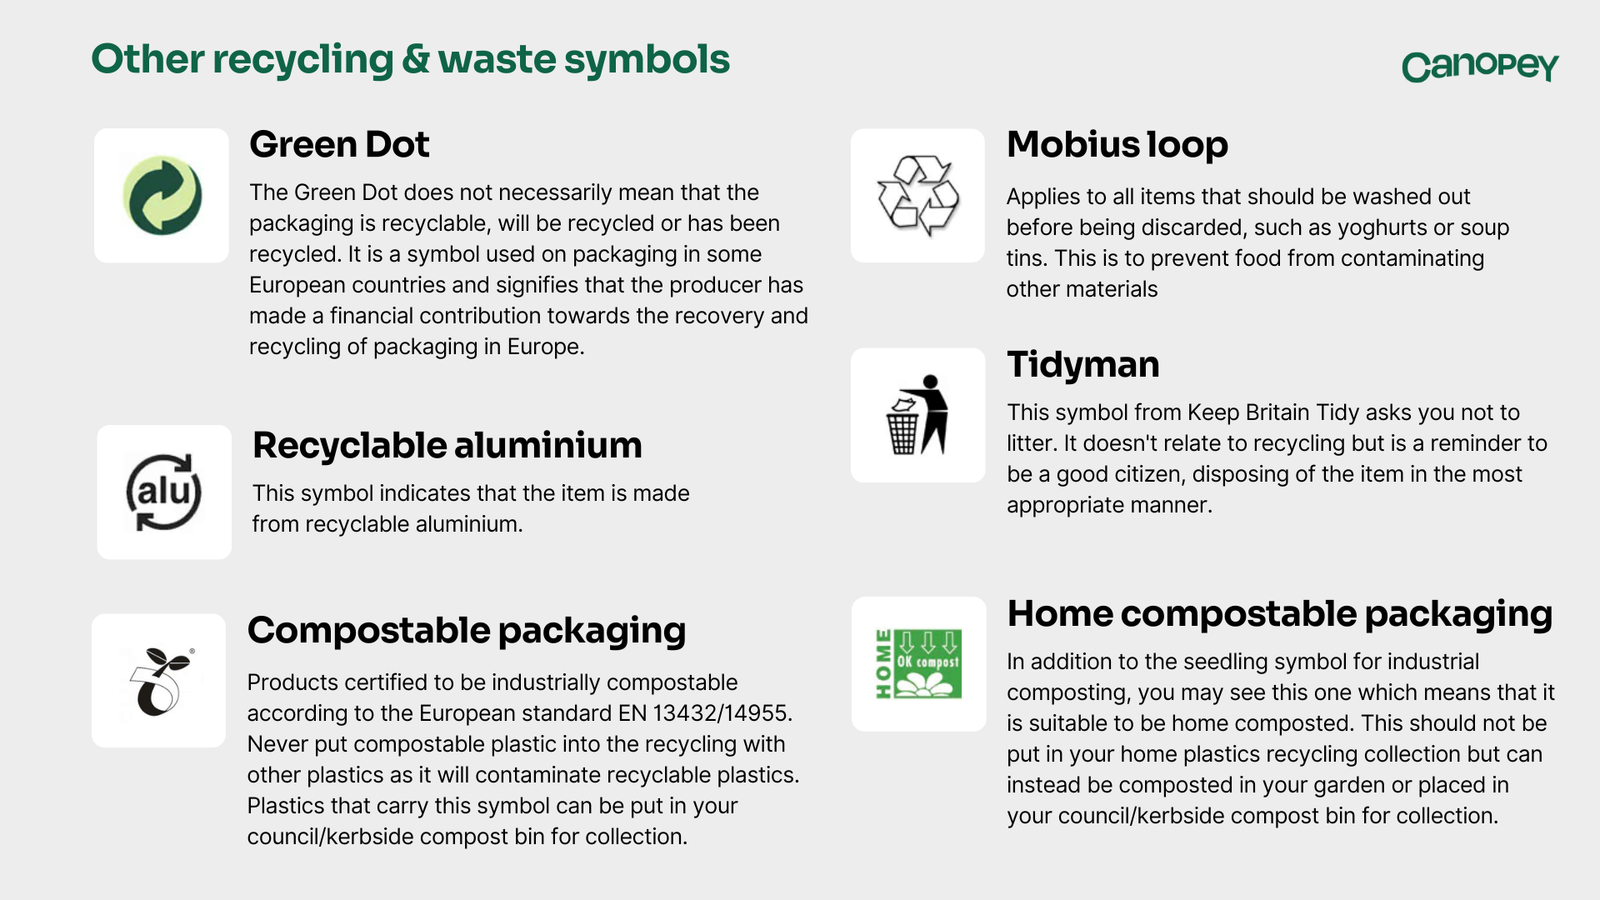 An infographic showing other recycling & waste symbols